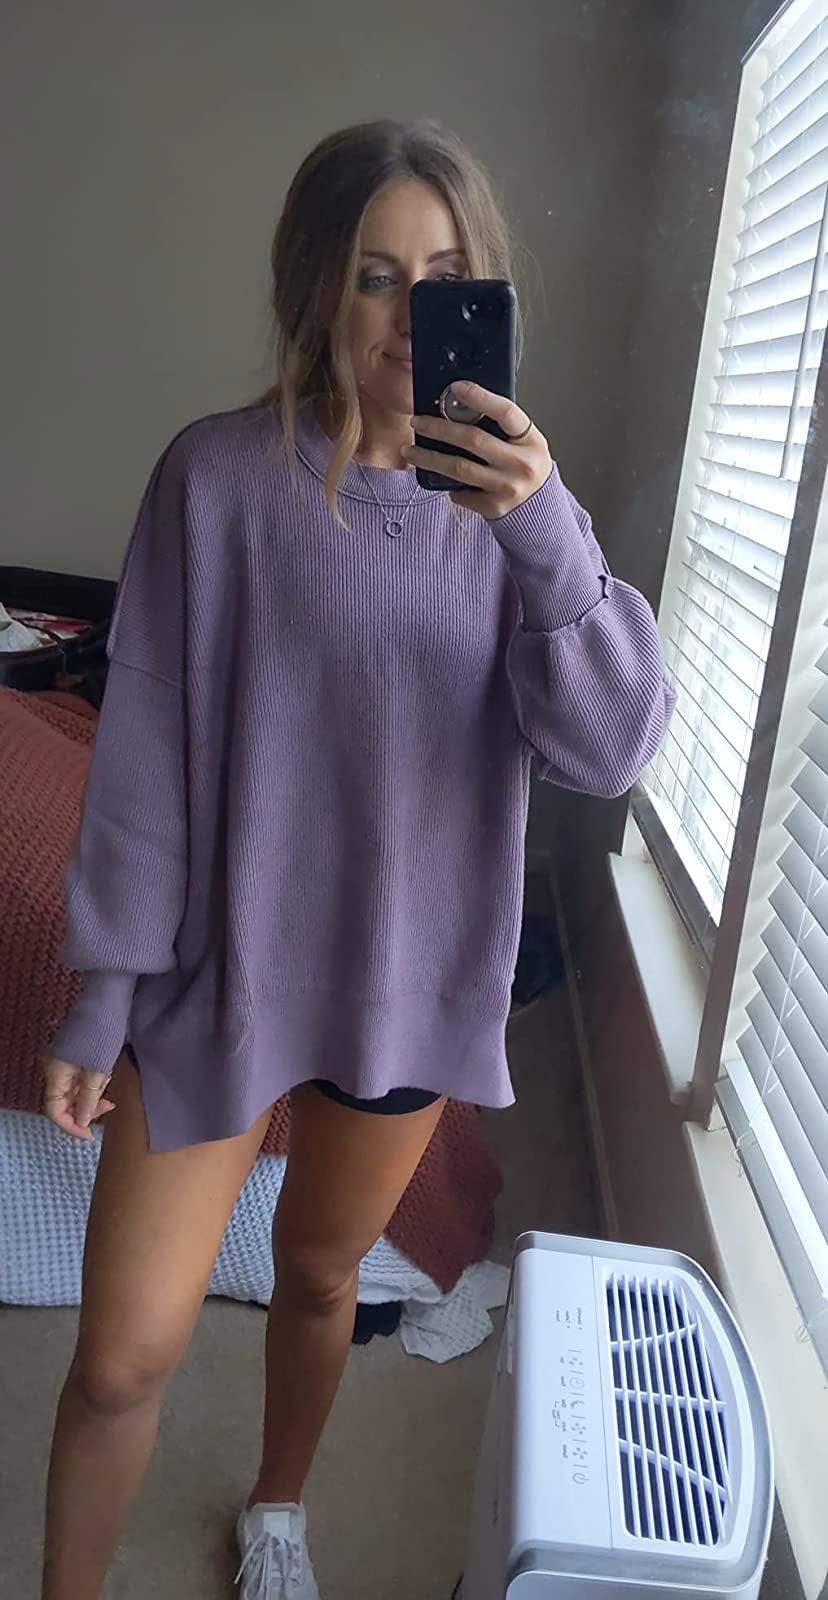 Light Violet Oversized Sweater with Leggings Outfits (3 ideas & outfits)